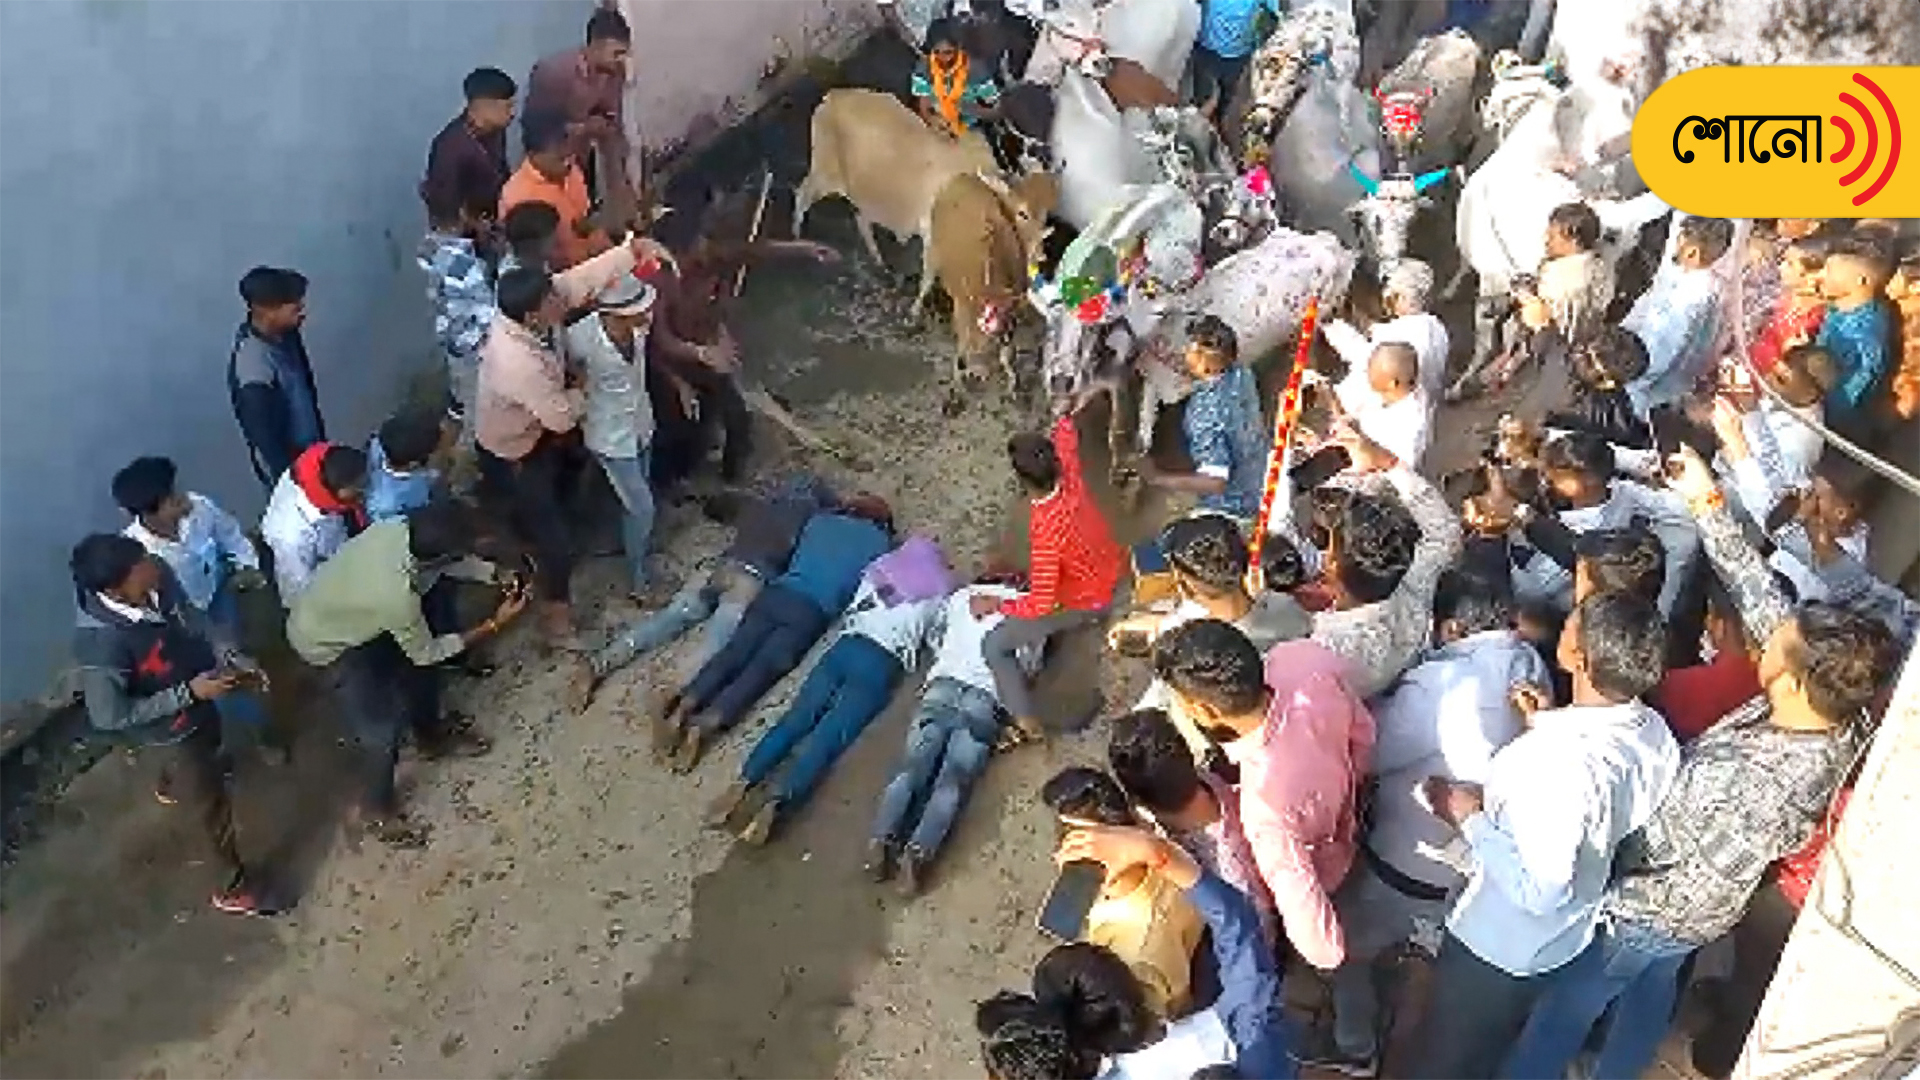 Cows Run Over Villagers As Part Of Diwali Ritual In MP's Ujjain